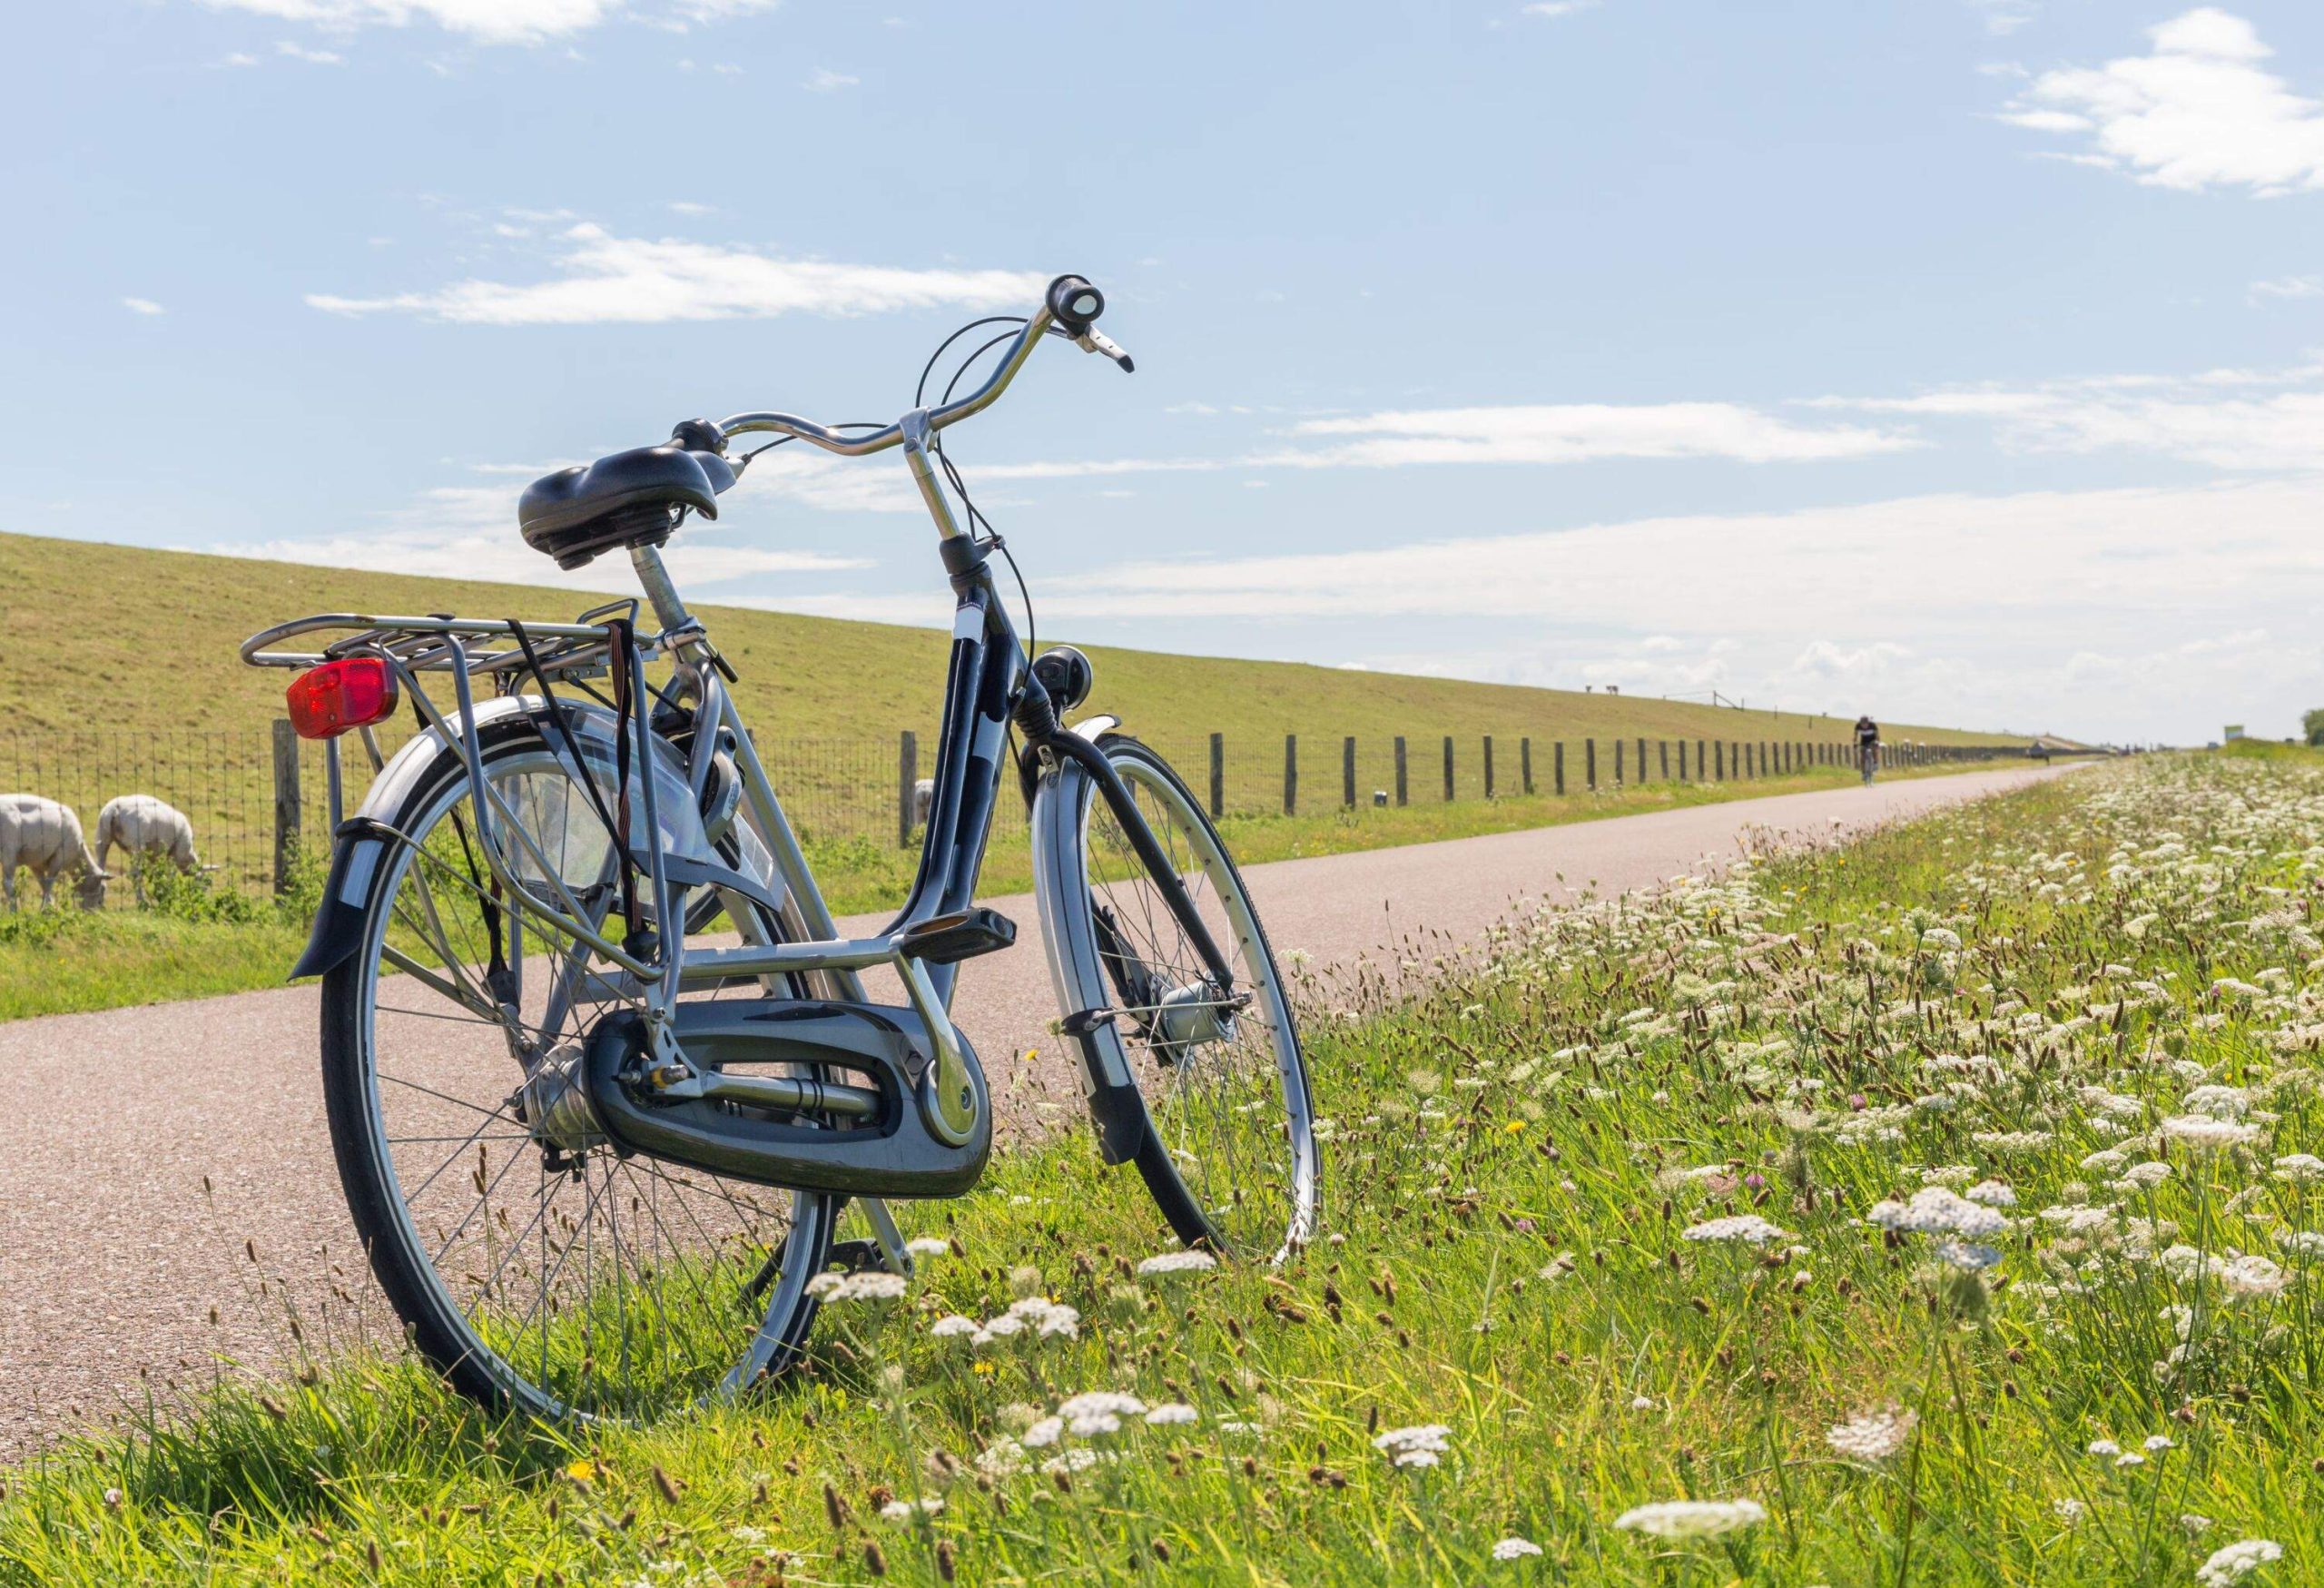 A bicycle stands next to a bicycle path on the Dutch Wadden island Texel. Lots of white flowers are seen next to the path, and sheep are grazing on the other side. In the distance, a cyclist is coming from the opposite direction